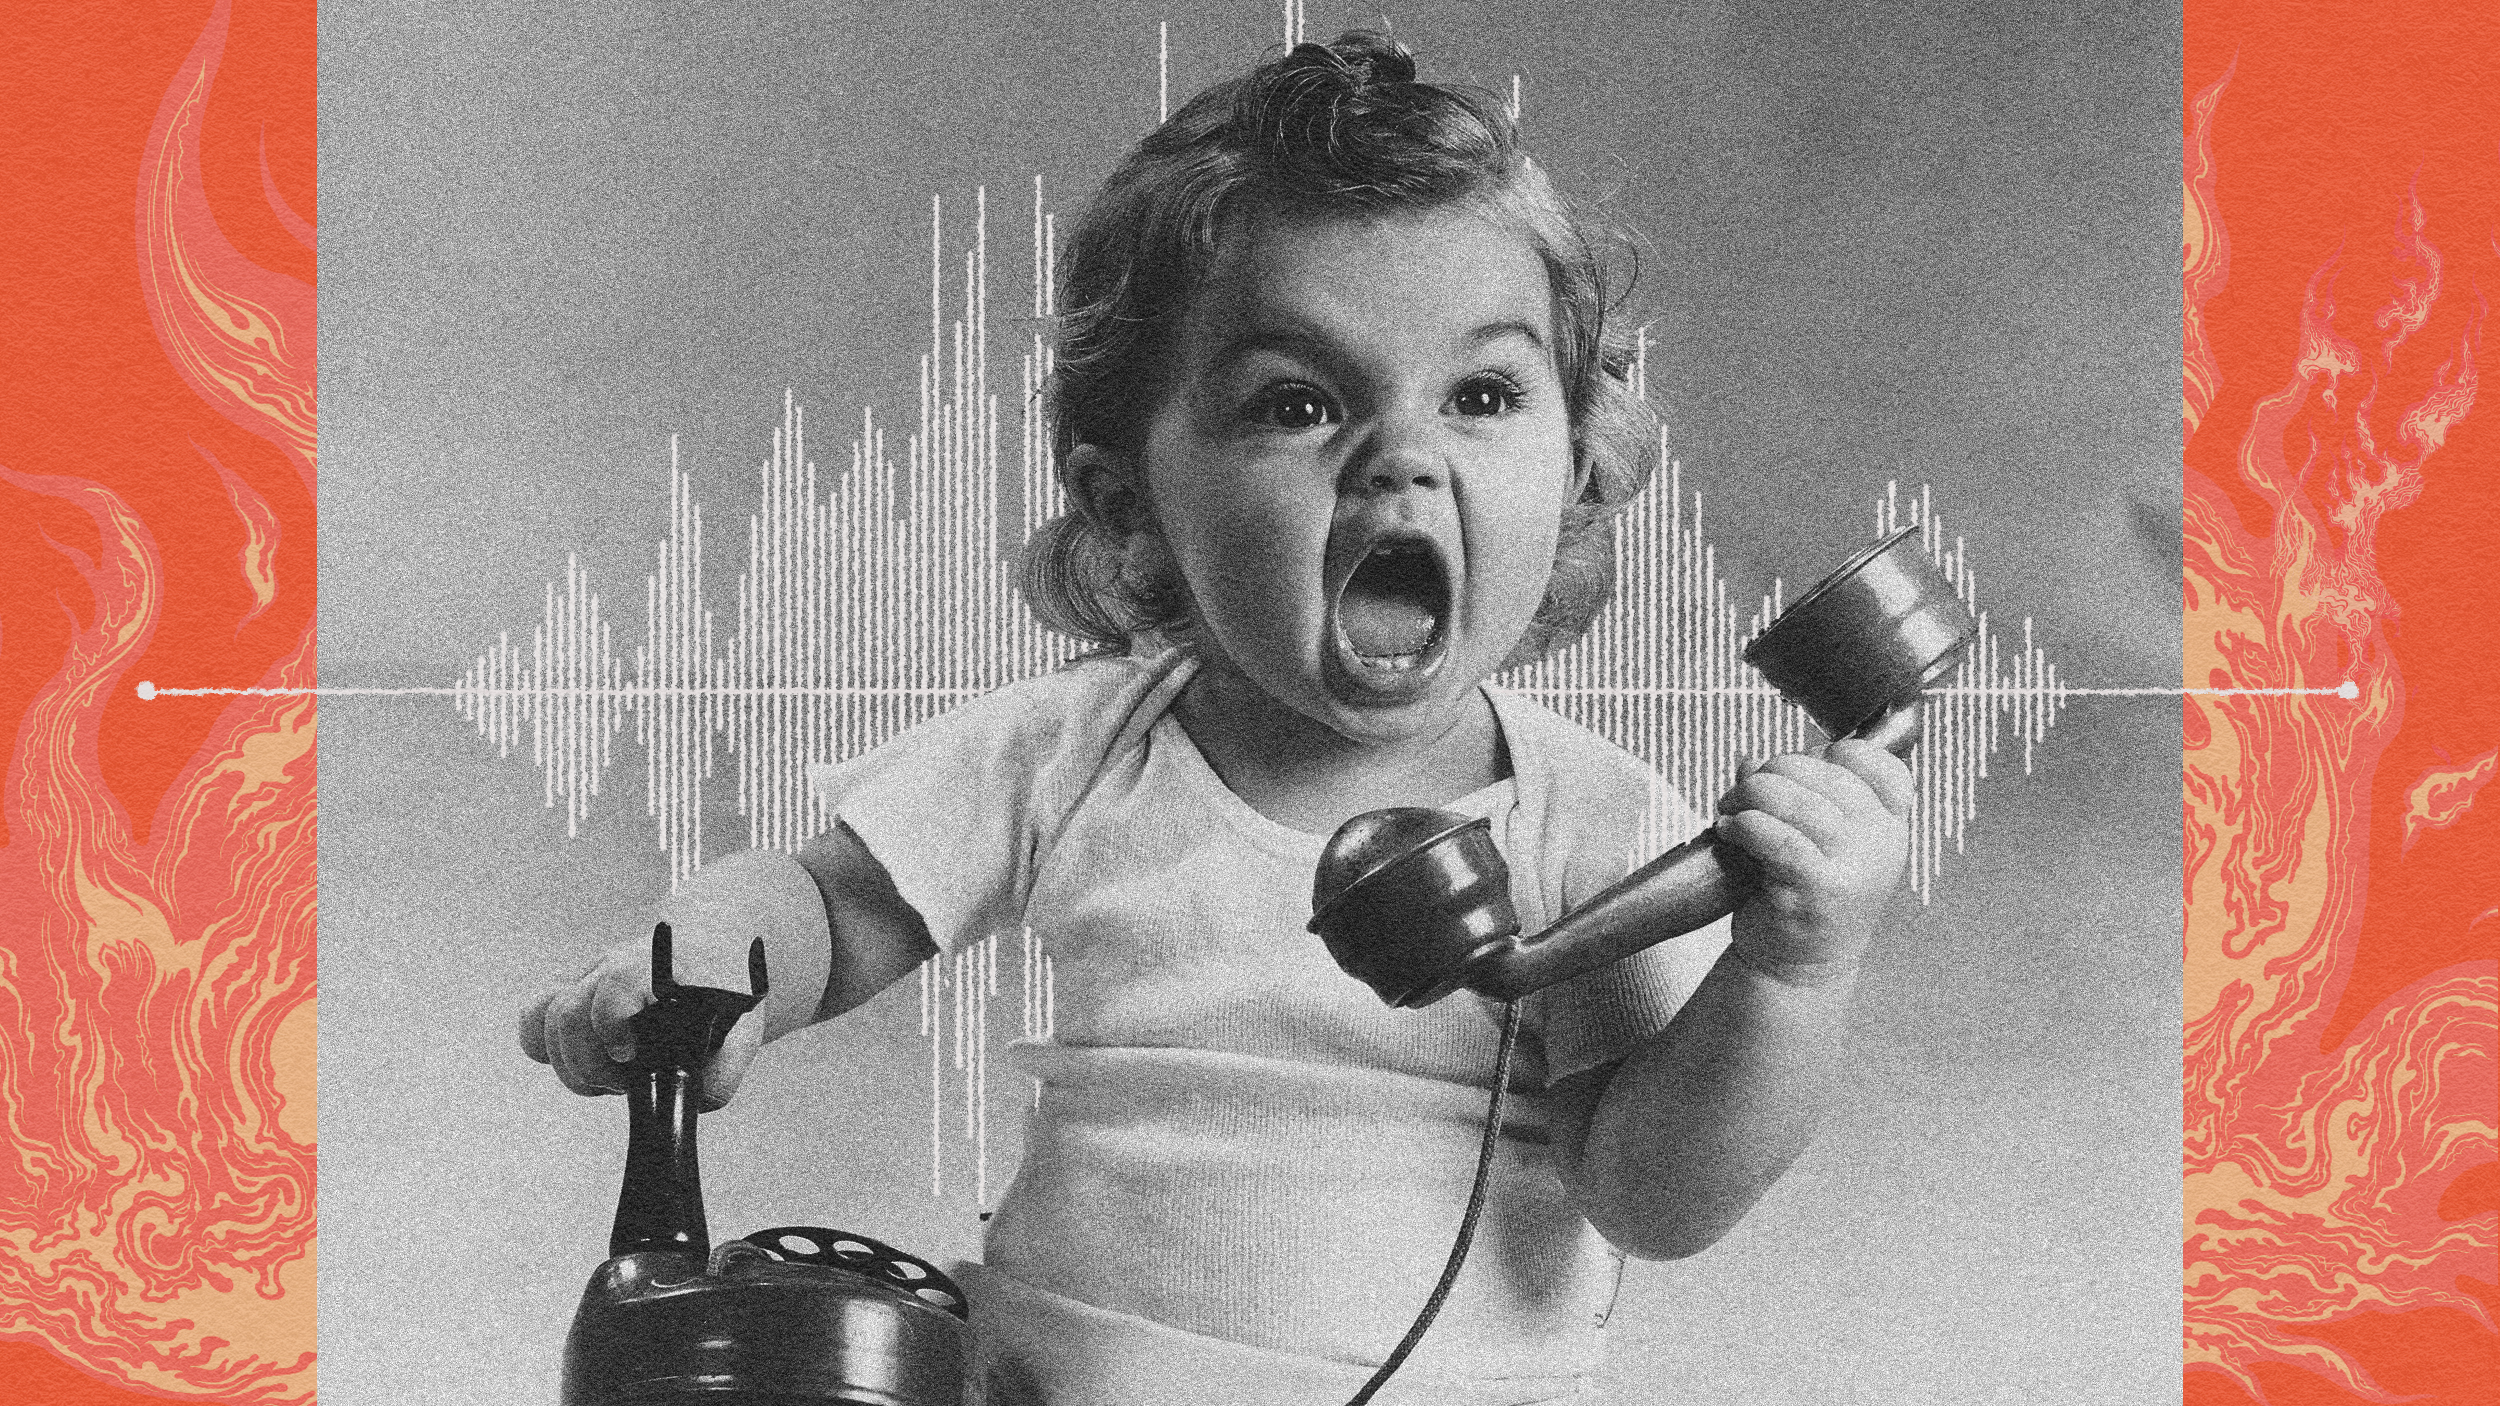 A black and white photo of a young child holding a vintage telephone receiver to their ear, with an excited expression. The background features graphic designs of sound waveforms and orange flames, evoking the intense energy of death metal.